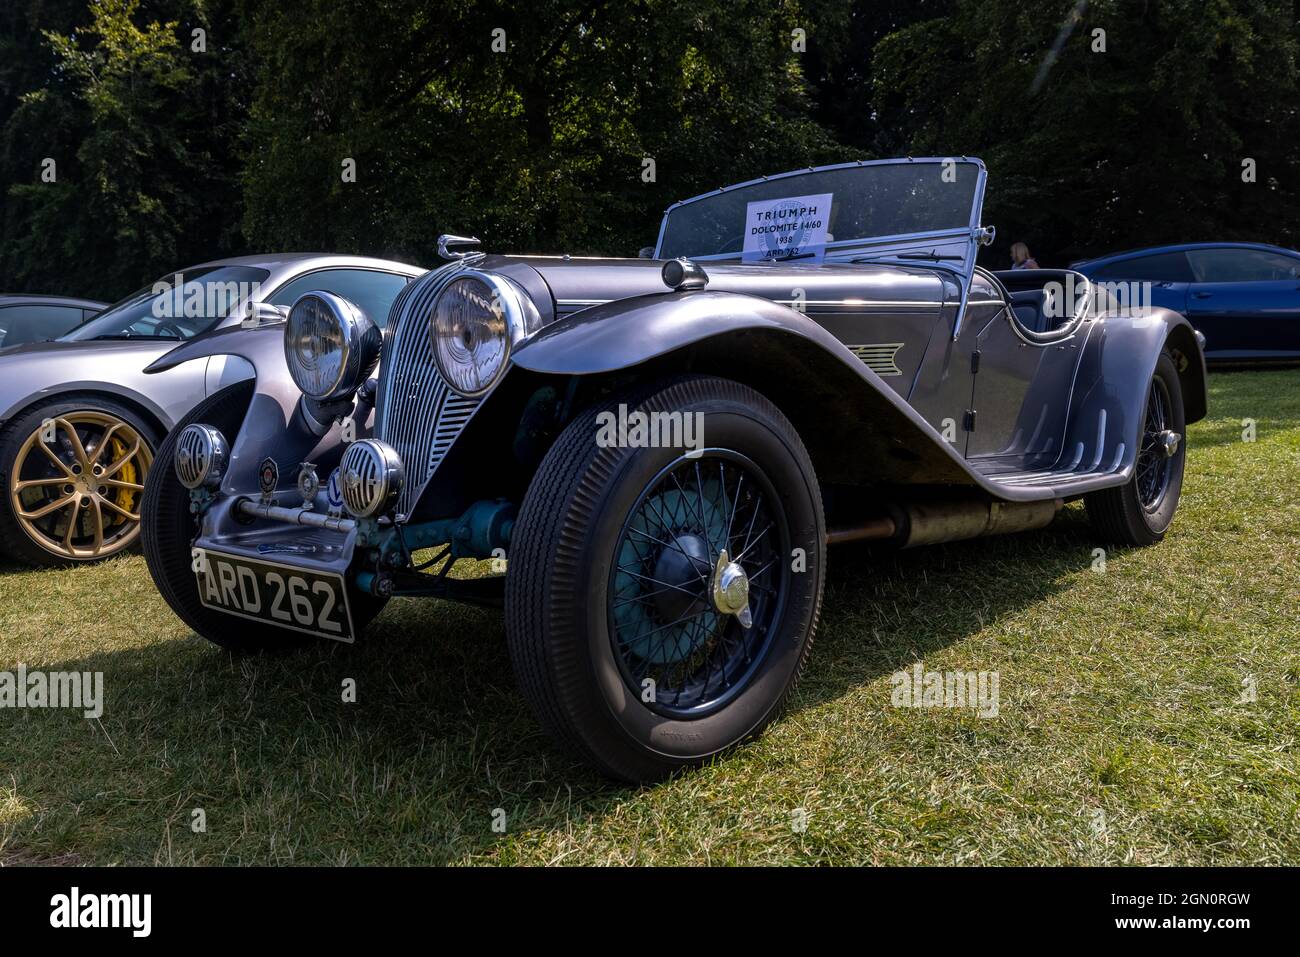 1938 Triumph Dolomite ‘ARD 262’ on display at the Salon Privé motor show held at Blenheim Palace on the 5th September 2021 Stock Photo